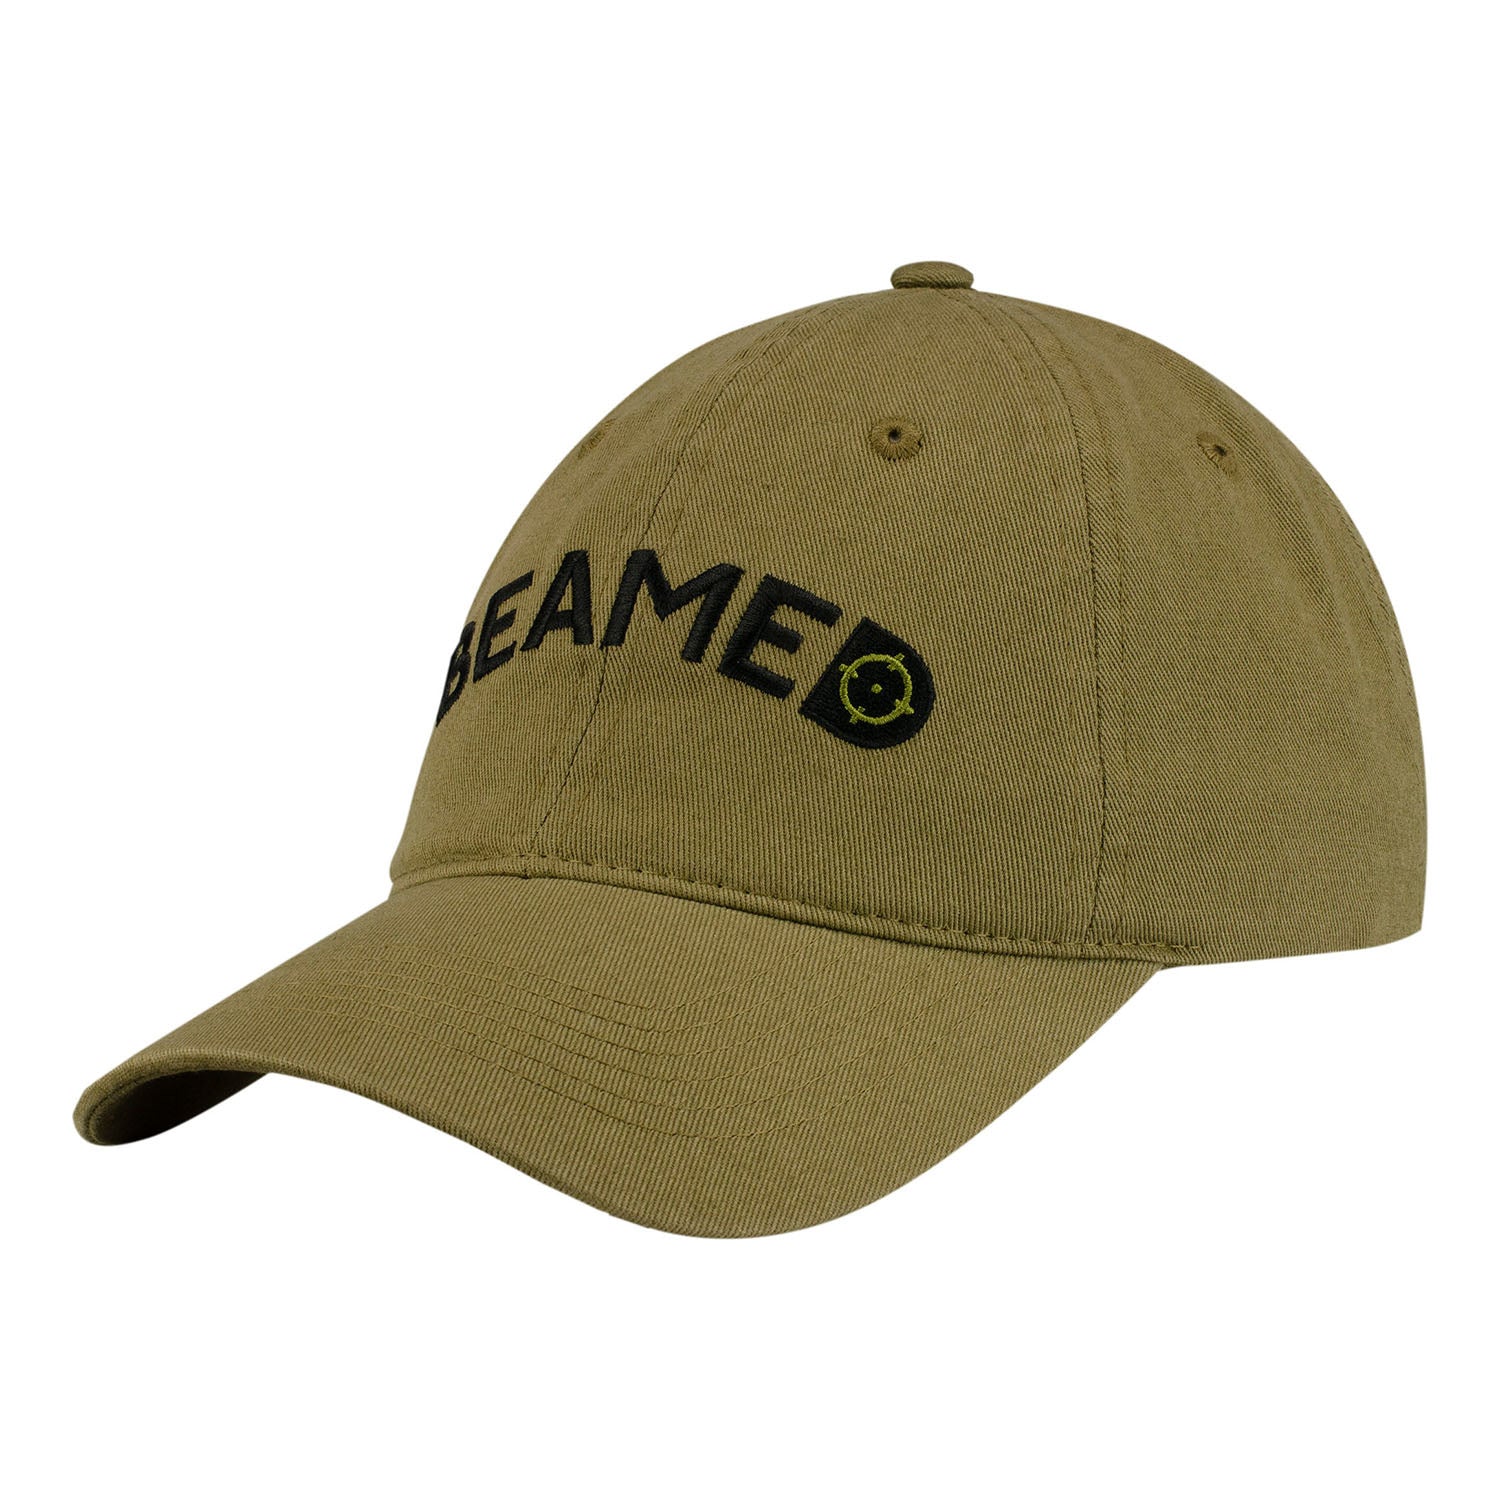 Call of Duty Olive Beamed Hat - Left View